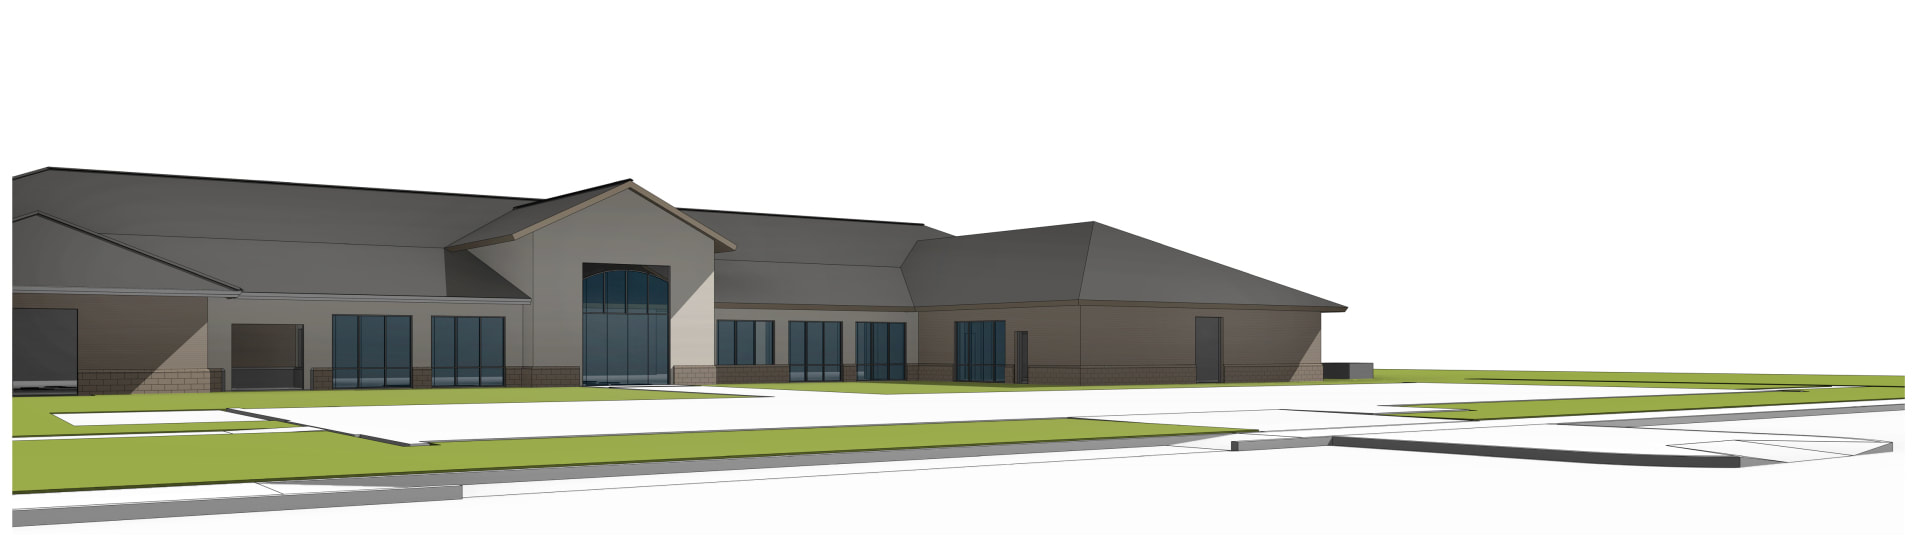 Conceptual rendering of addition to Denham Springs-Walker branch of the Livingston Parish Library. Designed by Cockfield Jackson Architects.